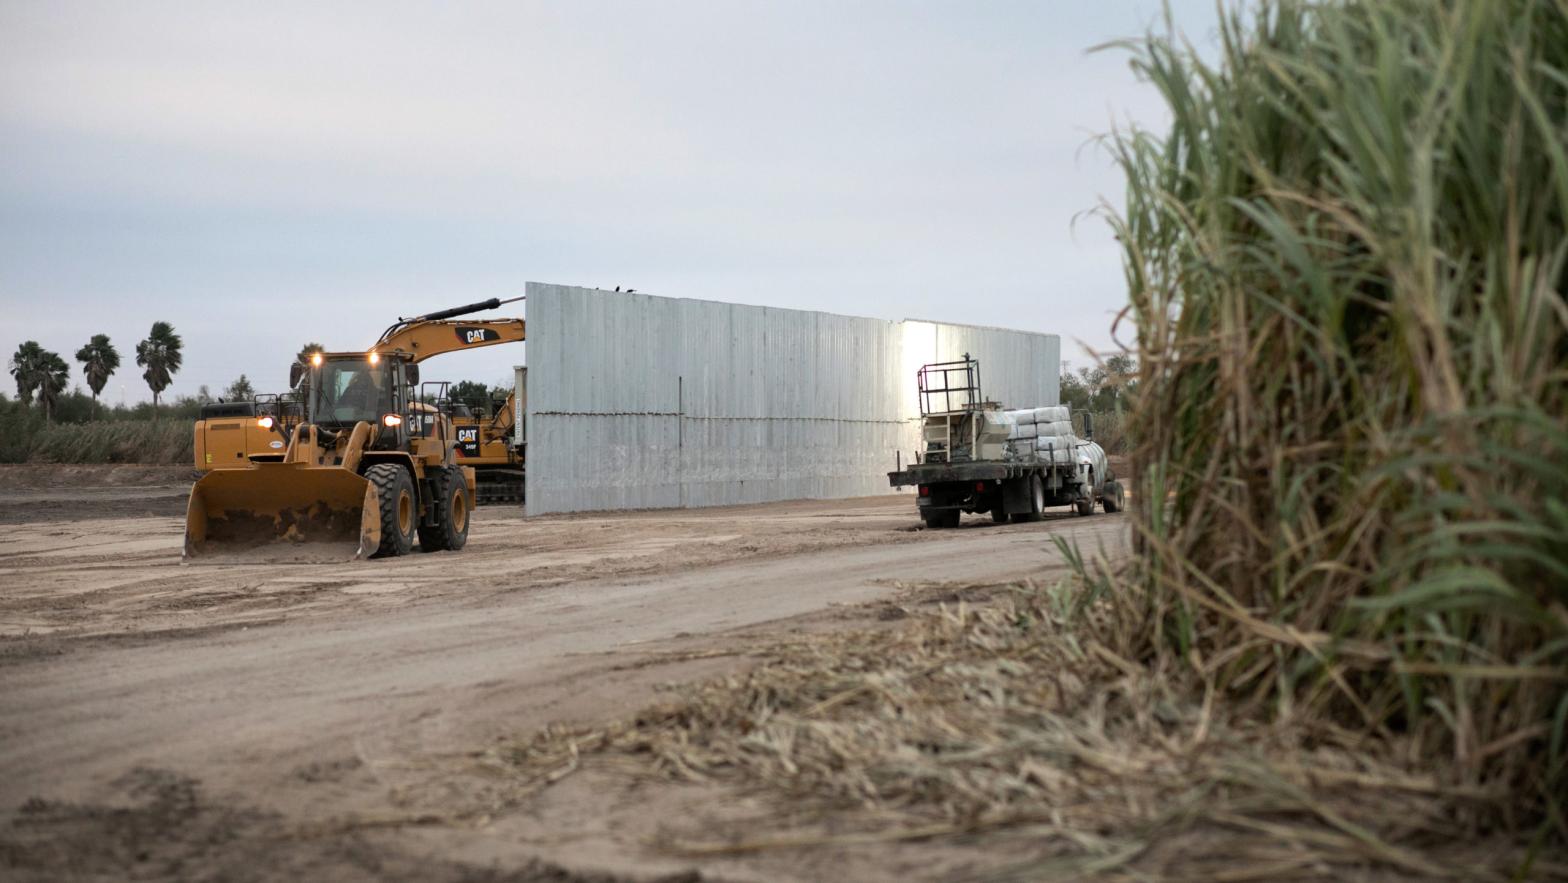 A loader grades land near a section of privately-built border wall under construction on December 11, 2019 near Mission, Texas.  (Photo: John Moore, Getty Images)